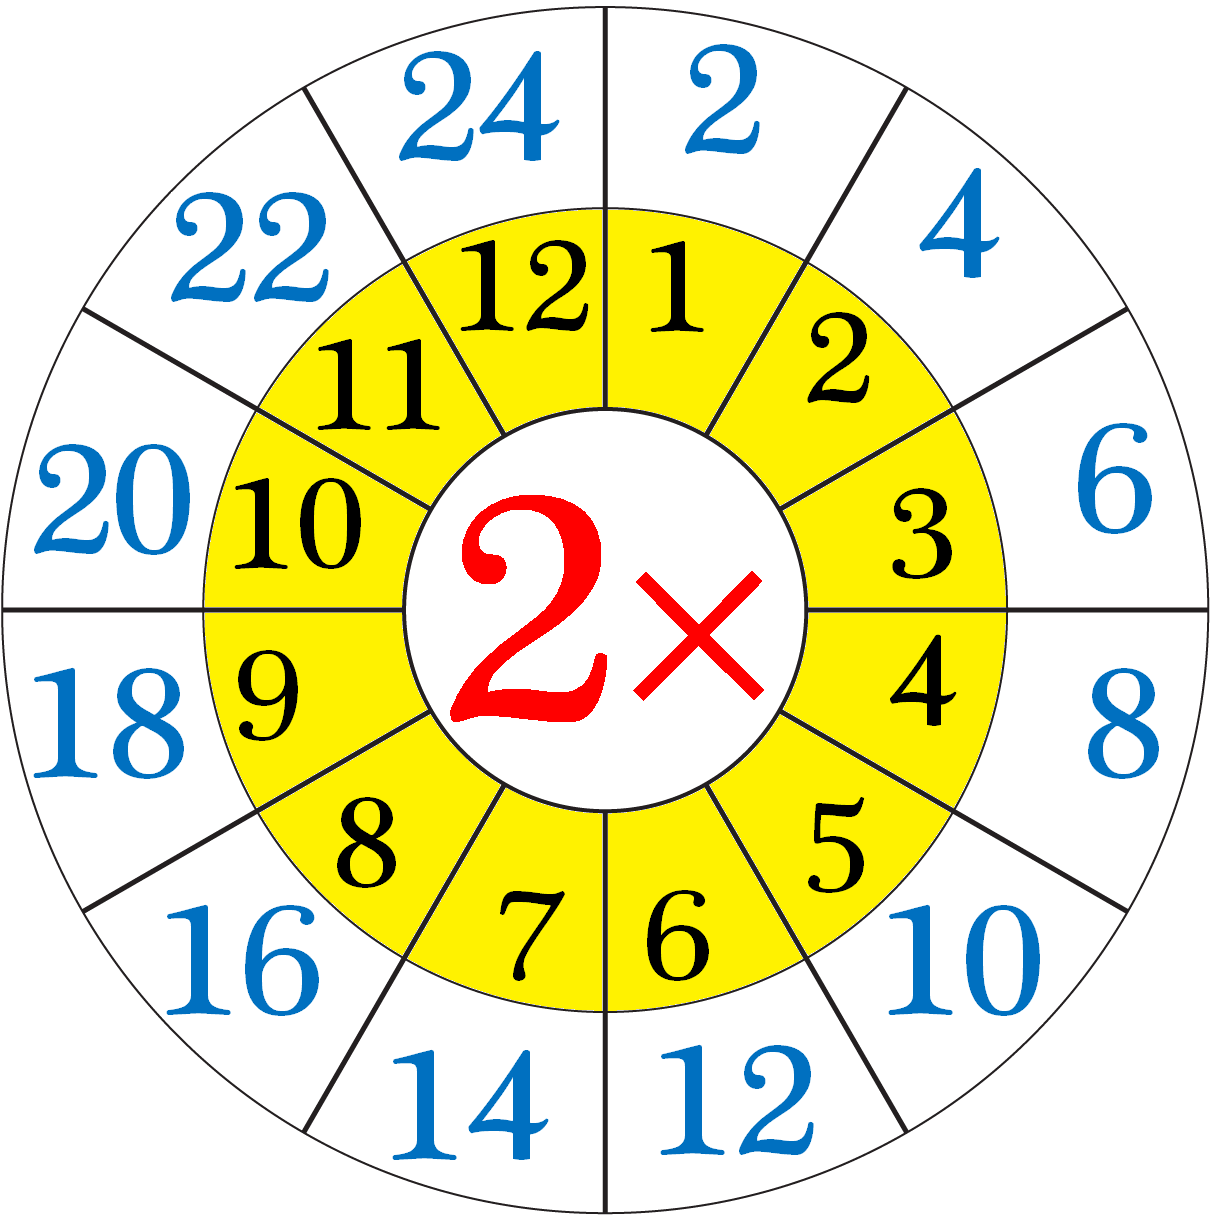 multiplication-table-of-2-repeated-addition-by-2-s-read-write-the